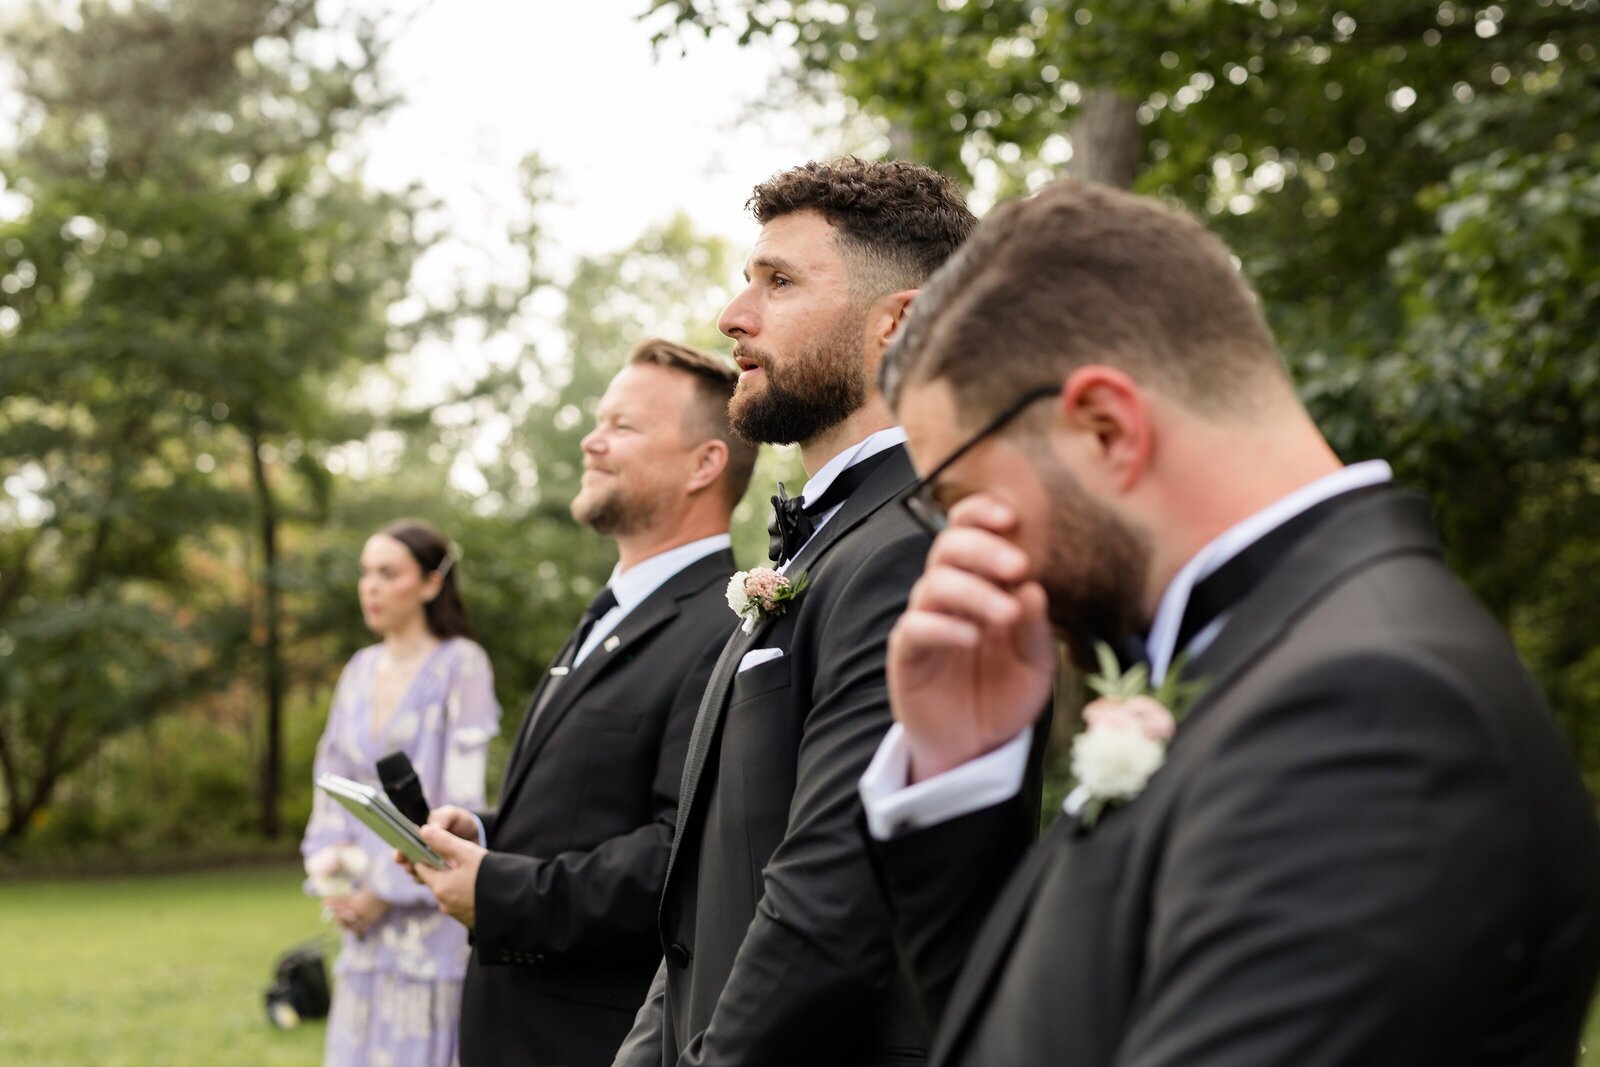 Groom-and-grooms-brother-emotional-seeing-bride-coming-down-the-aisle-at-an-outdoor-elsie-perrin-williams-estate-wedding-ceremony